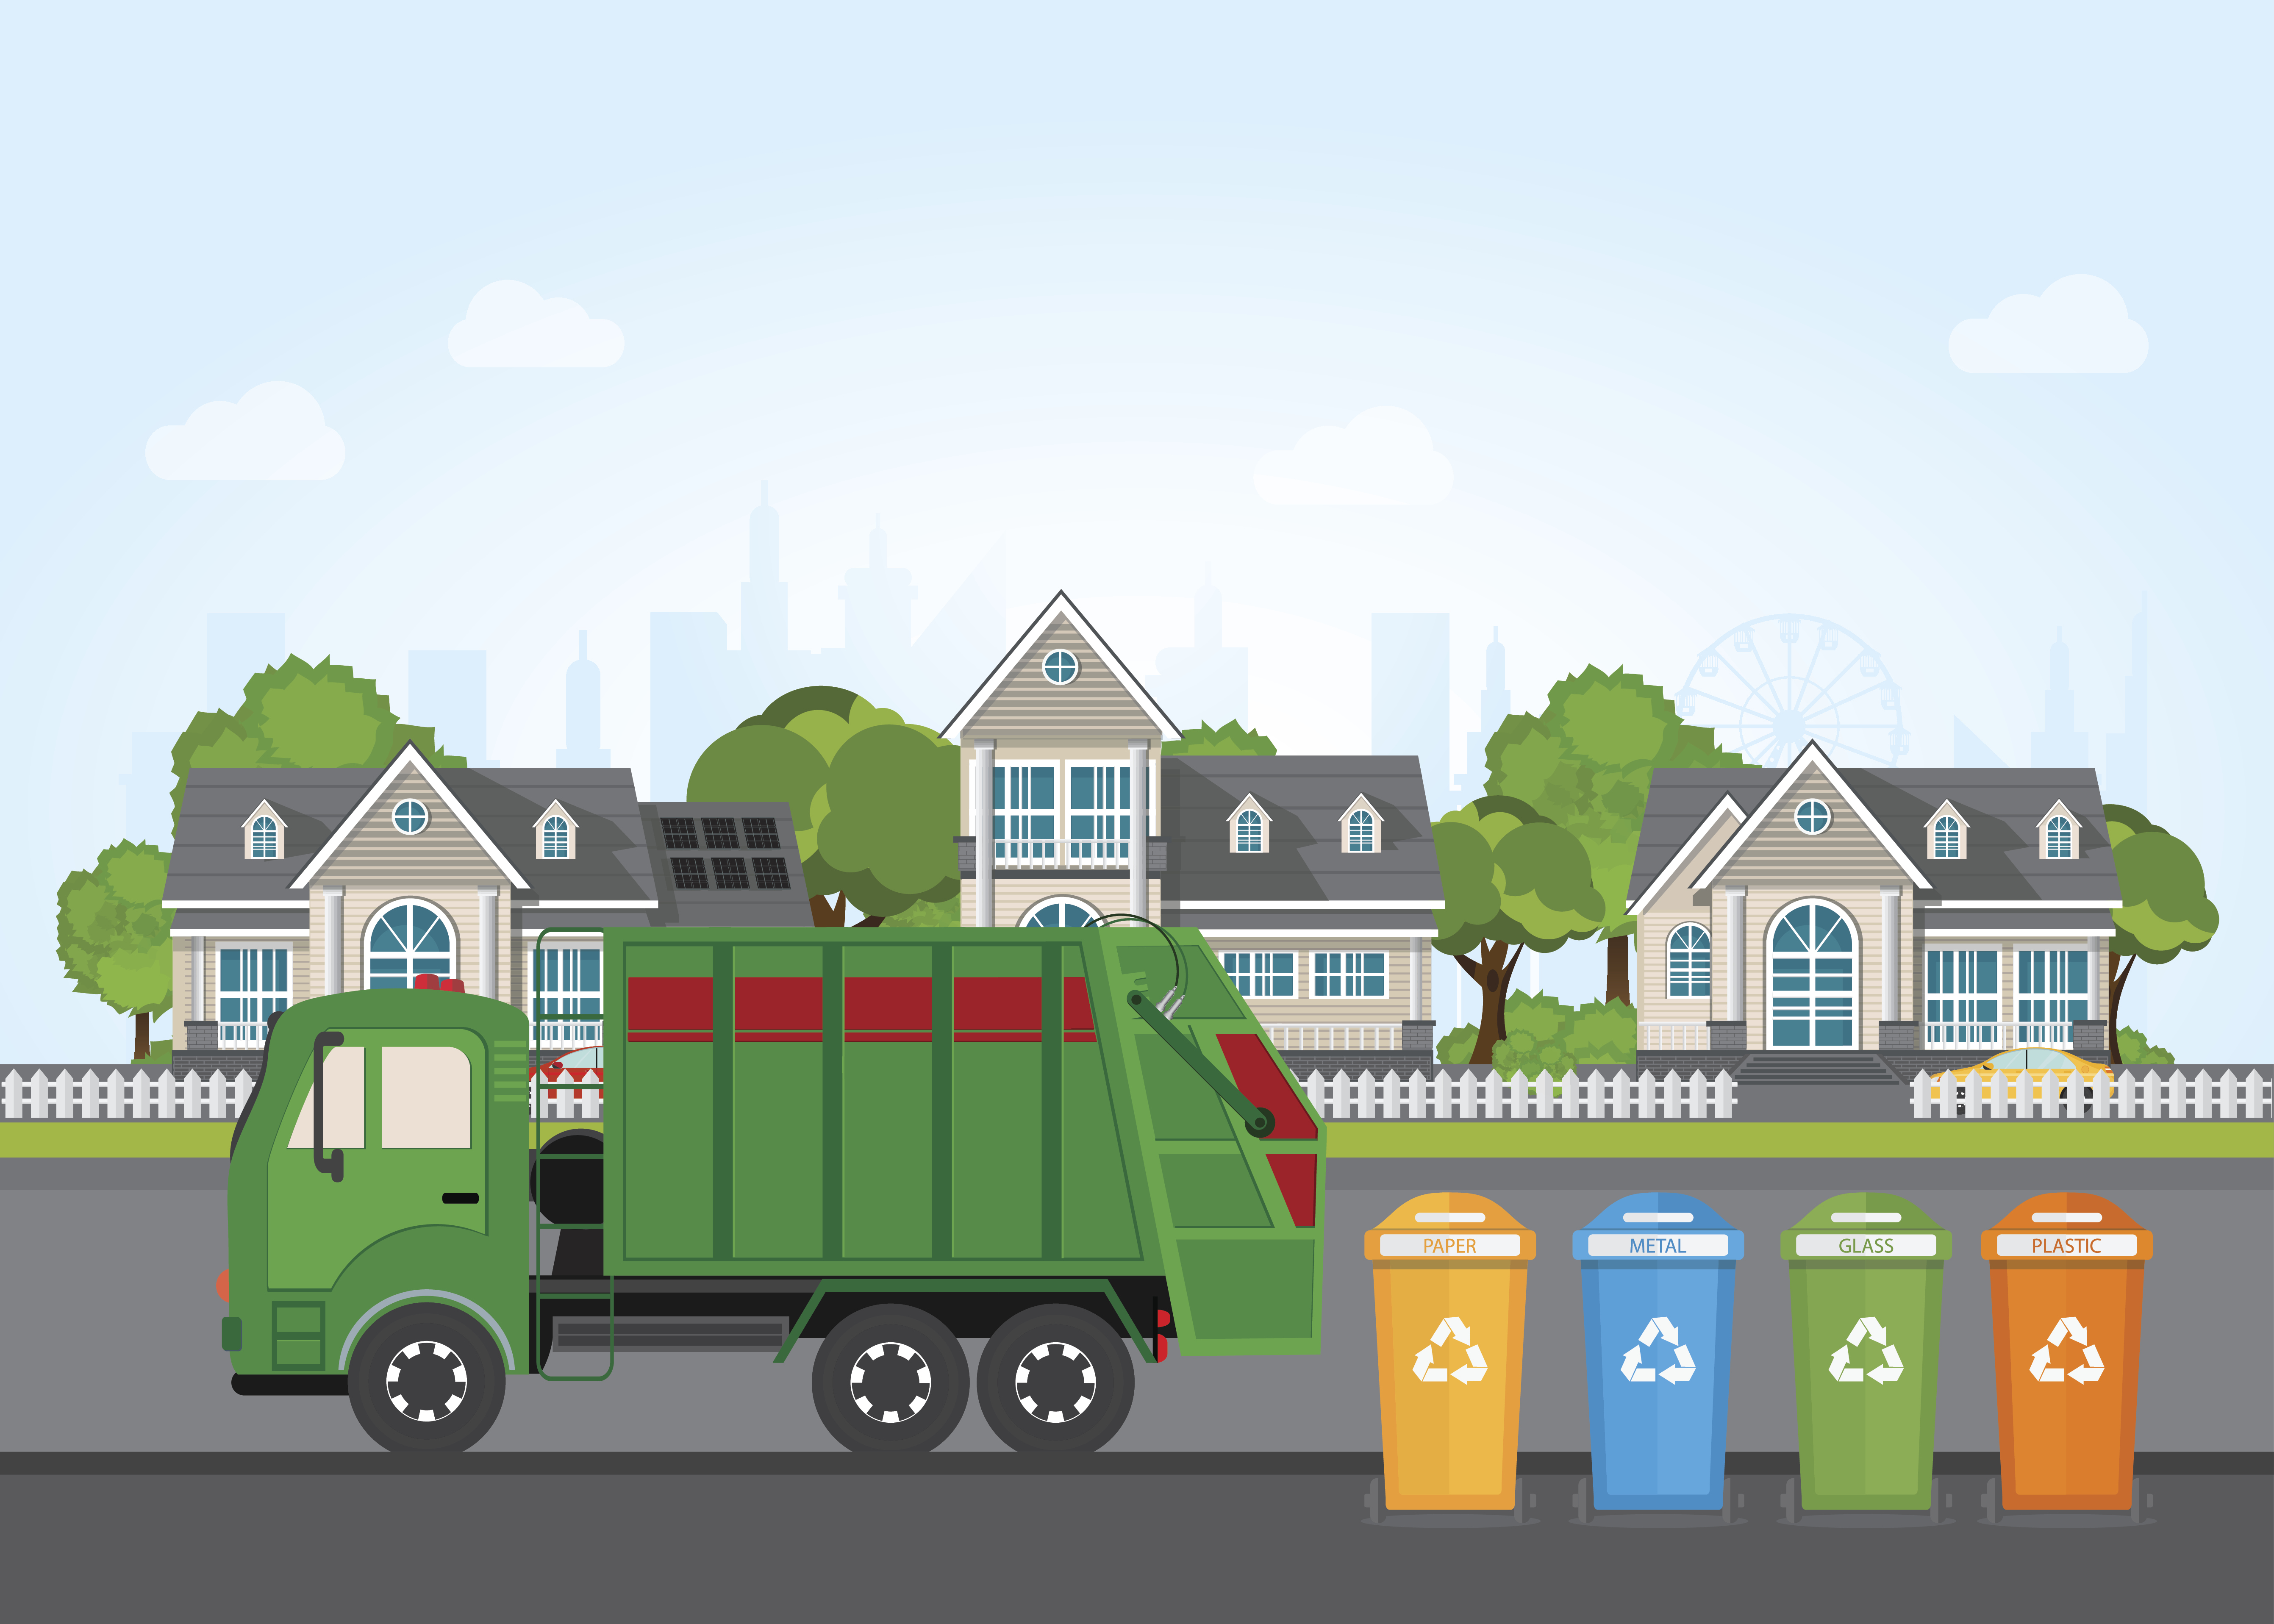 Garbage truck with recycling bins